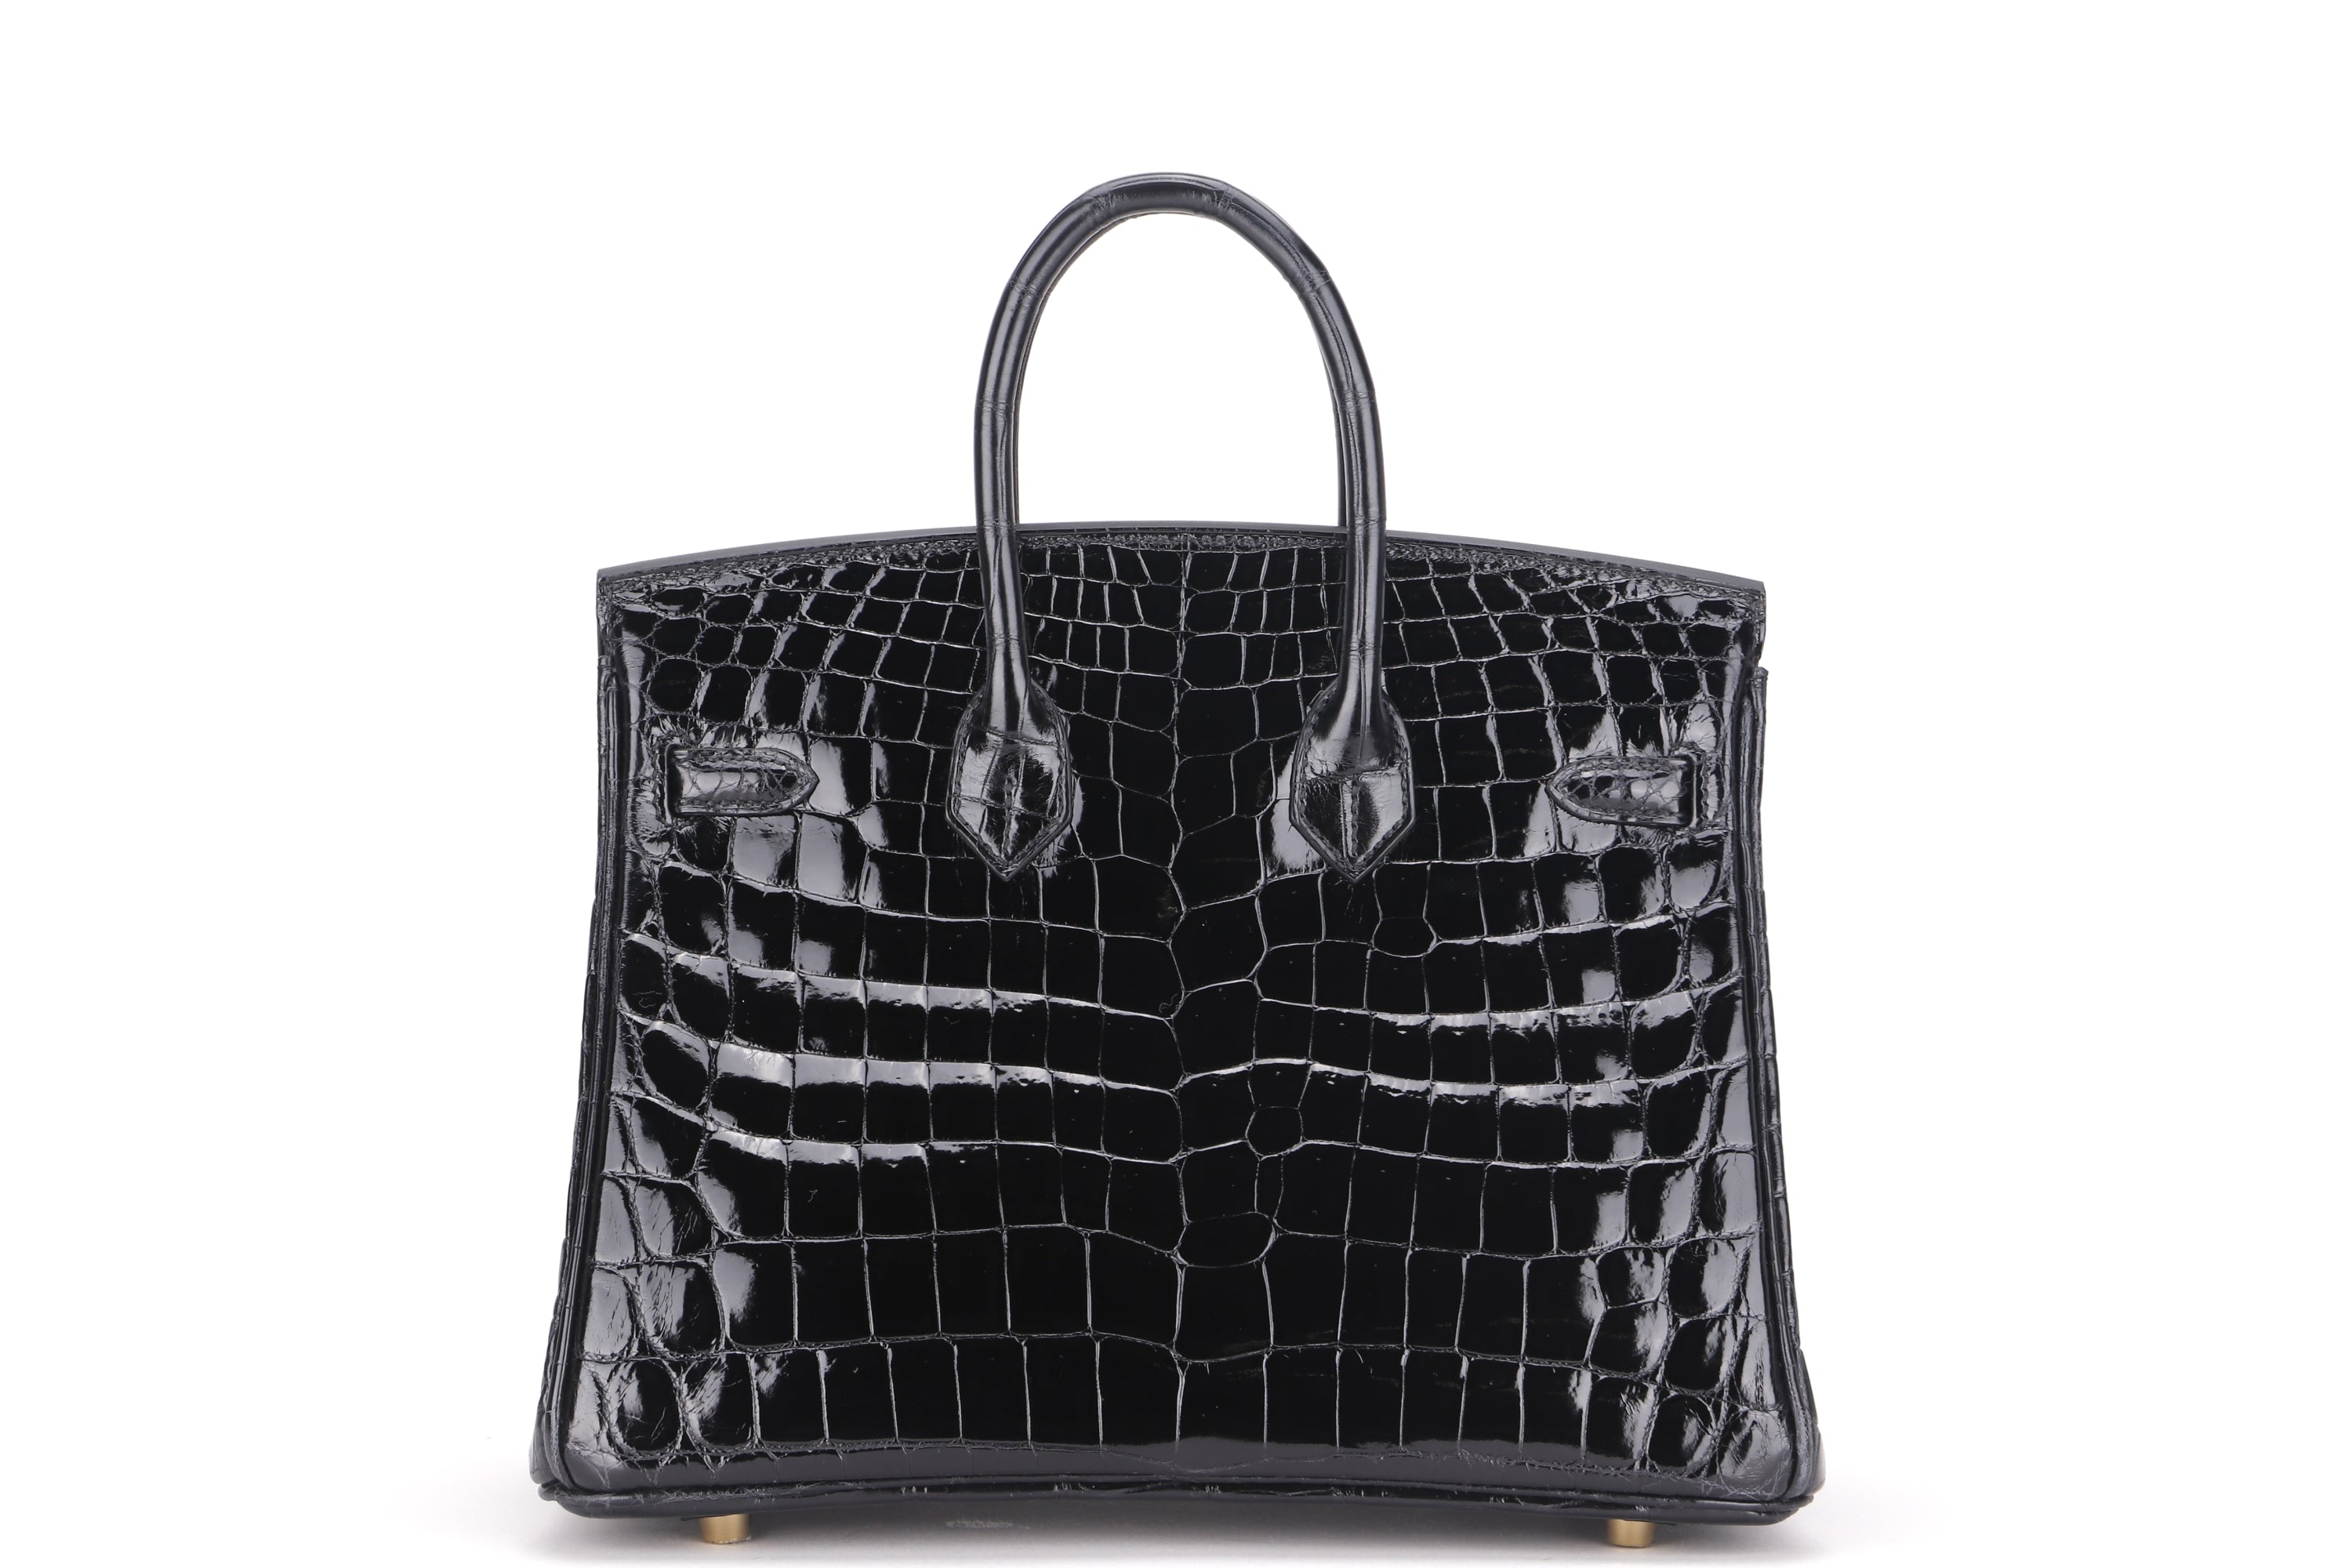 (EXOTIC) HERMES BIRKIN 25CM (STAMP U) BLACK NILO SHINY WITH GOLD HARDWARE, WITH KEYS, LOCK, RAINCOAT, CITIES, DUST COVER & BOX